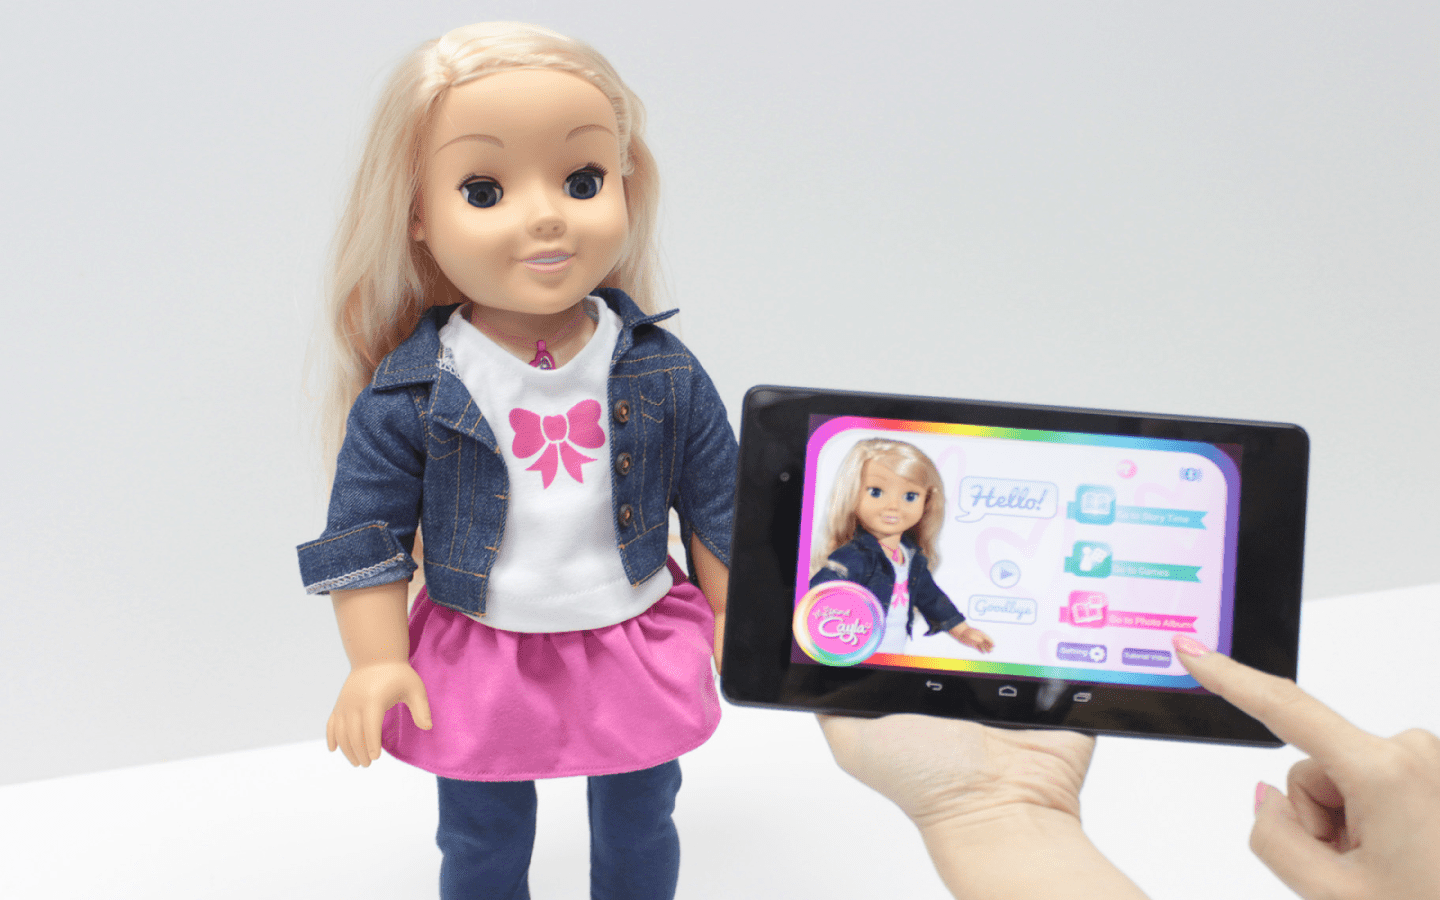 Cayla the doll might be a security vulnerability. Screenshot from the doll's app.